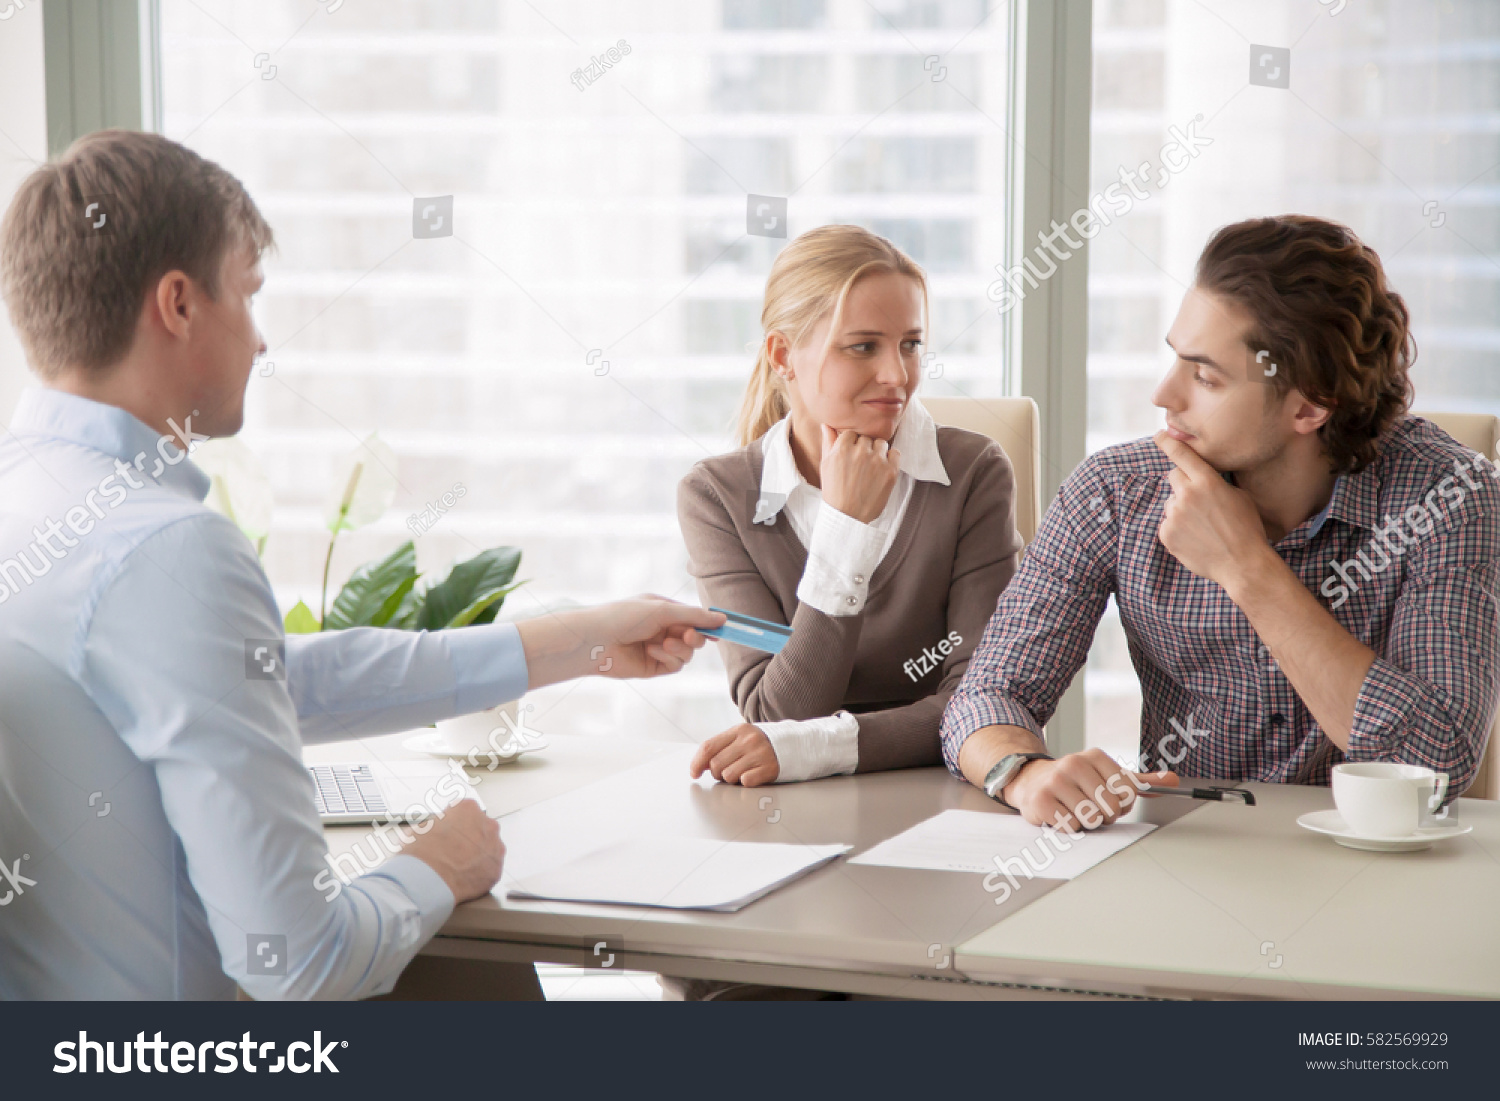 Bank consultant trying to convince clients to get a loan, offering credit card with high interest rate. Middle-class family sorting out finances and budget, not sure in the choice, looking doubtful  #582569929